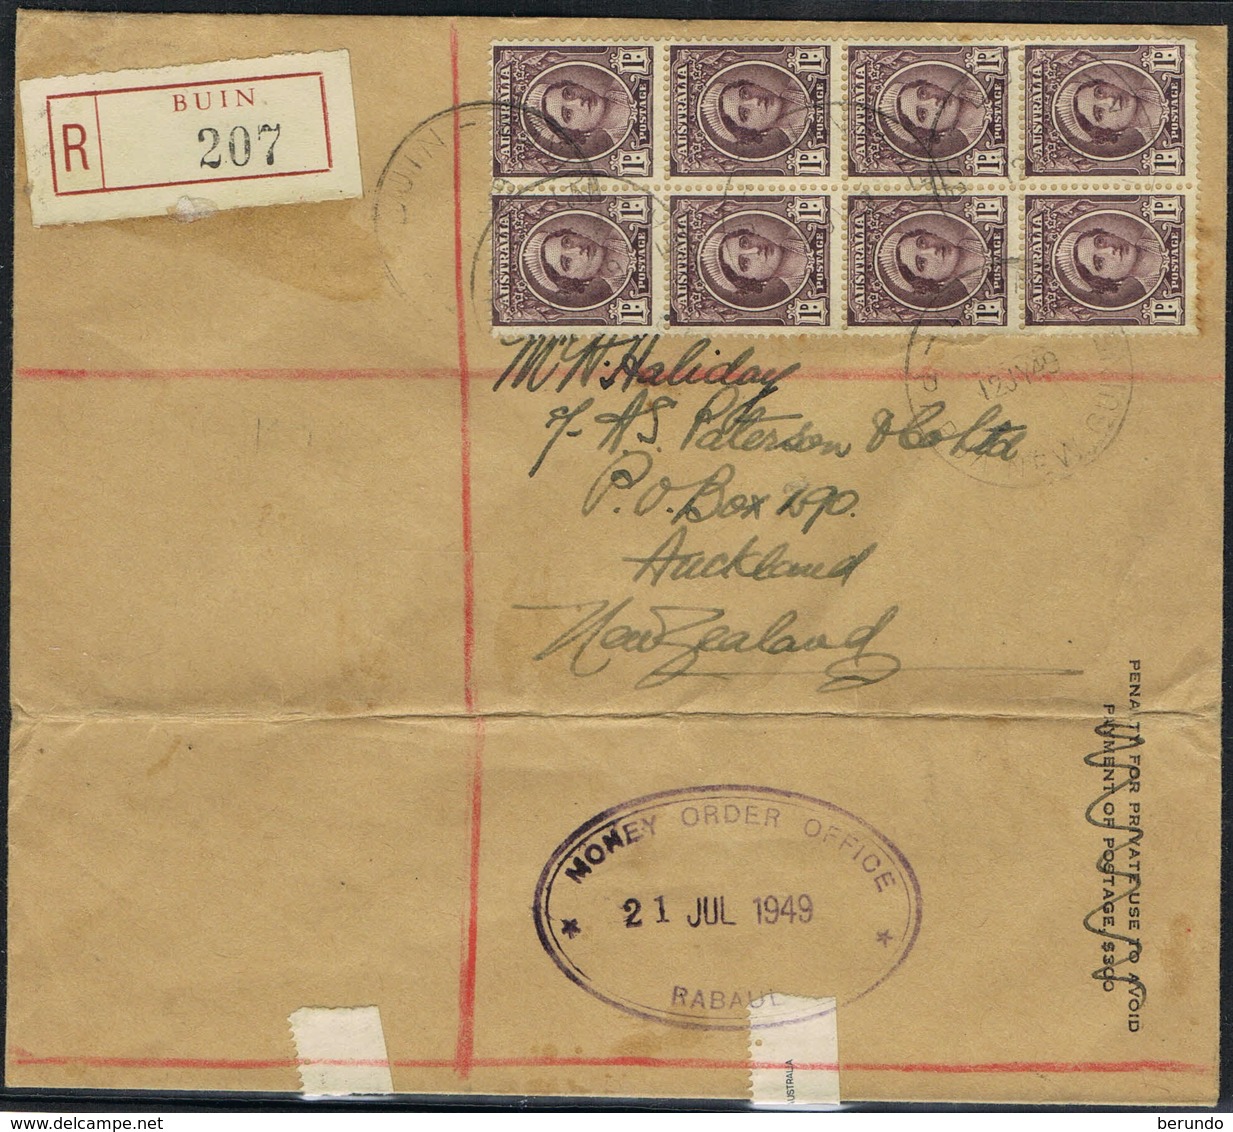 PAPUA NEW GUINEA- MONEY ORDER OFFICE Rabaul-R-Cover BUIN 12.07.1949 - 121 - Papouasie-Nouvelle-Guinée